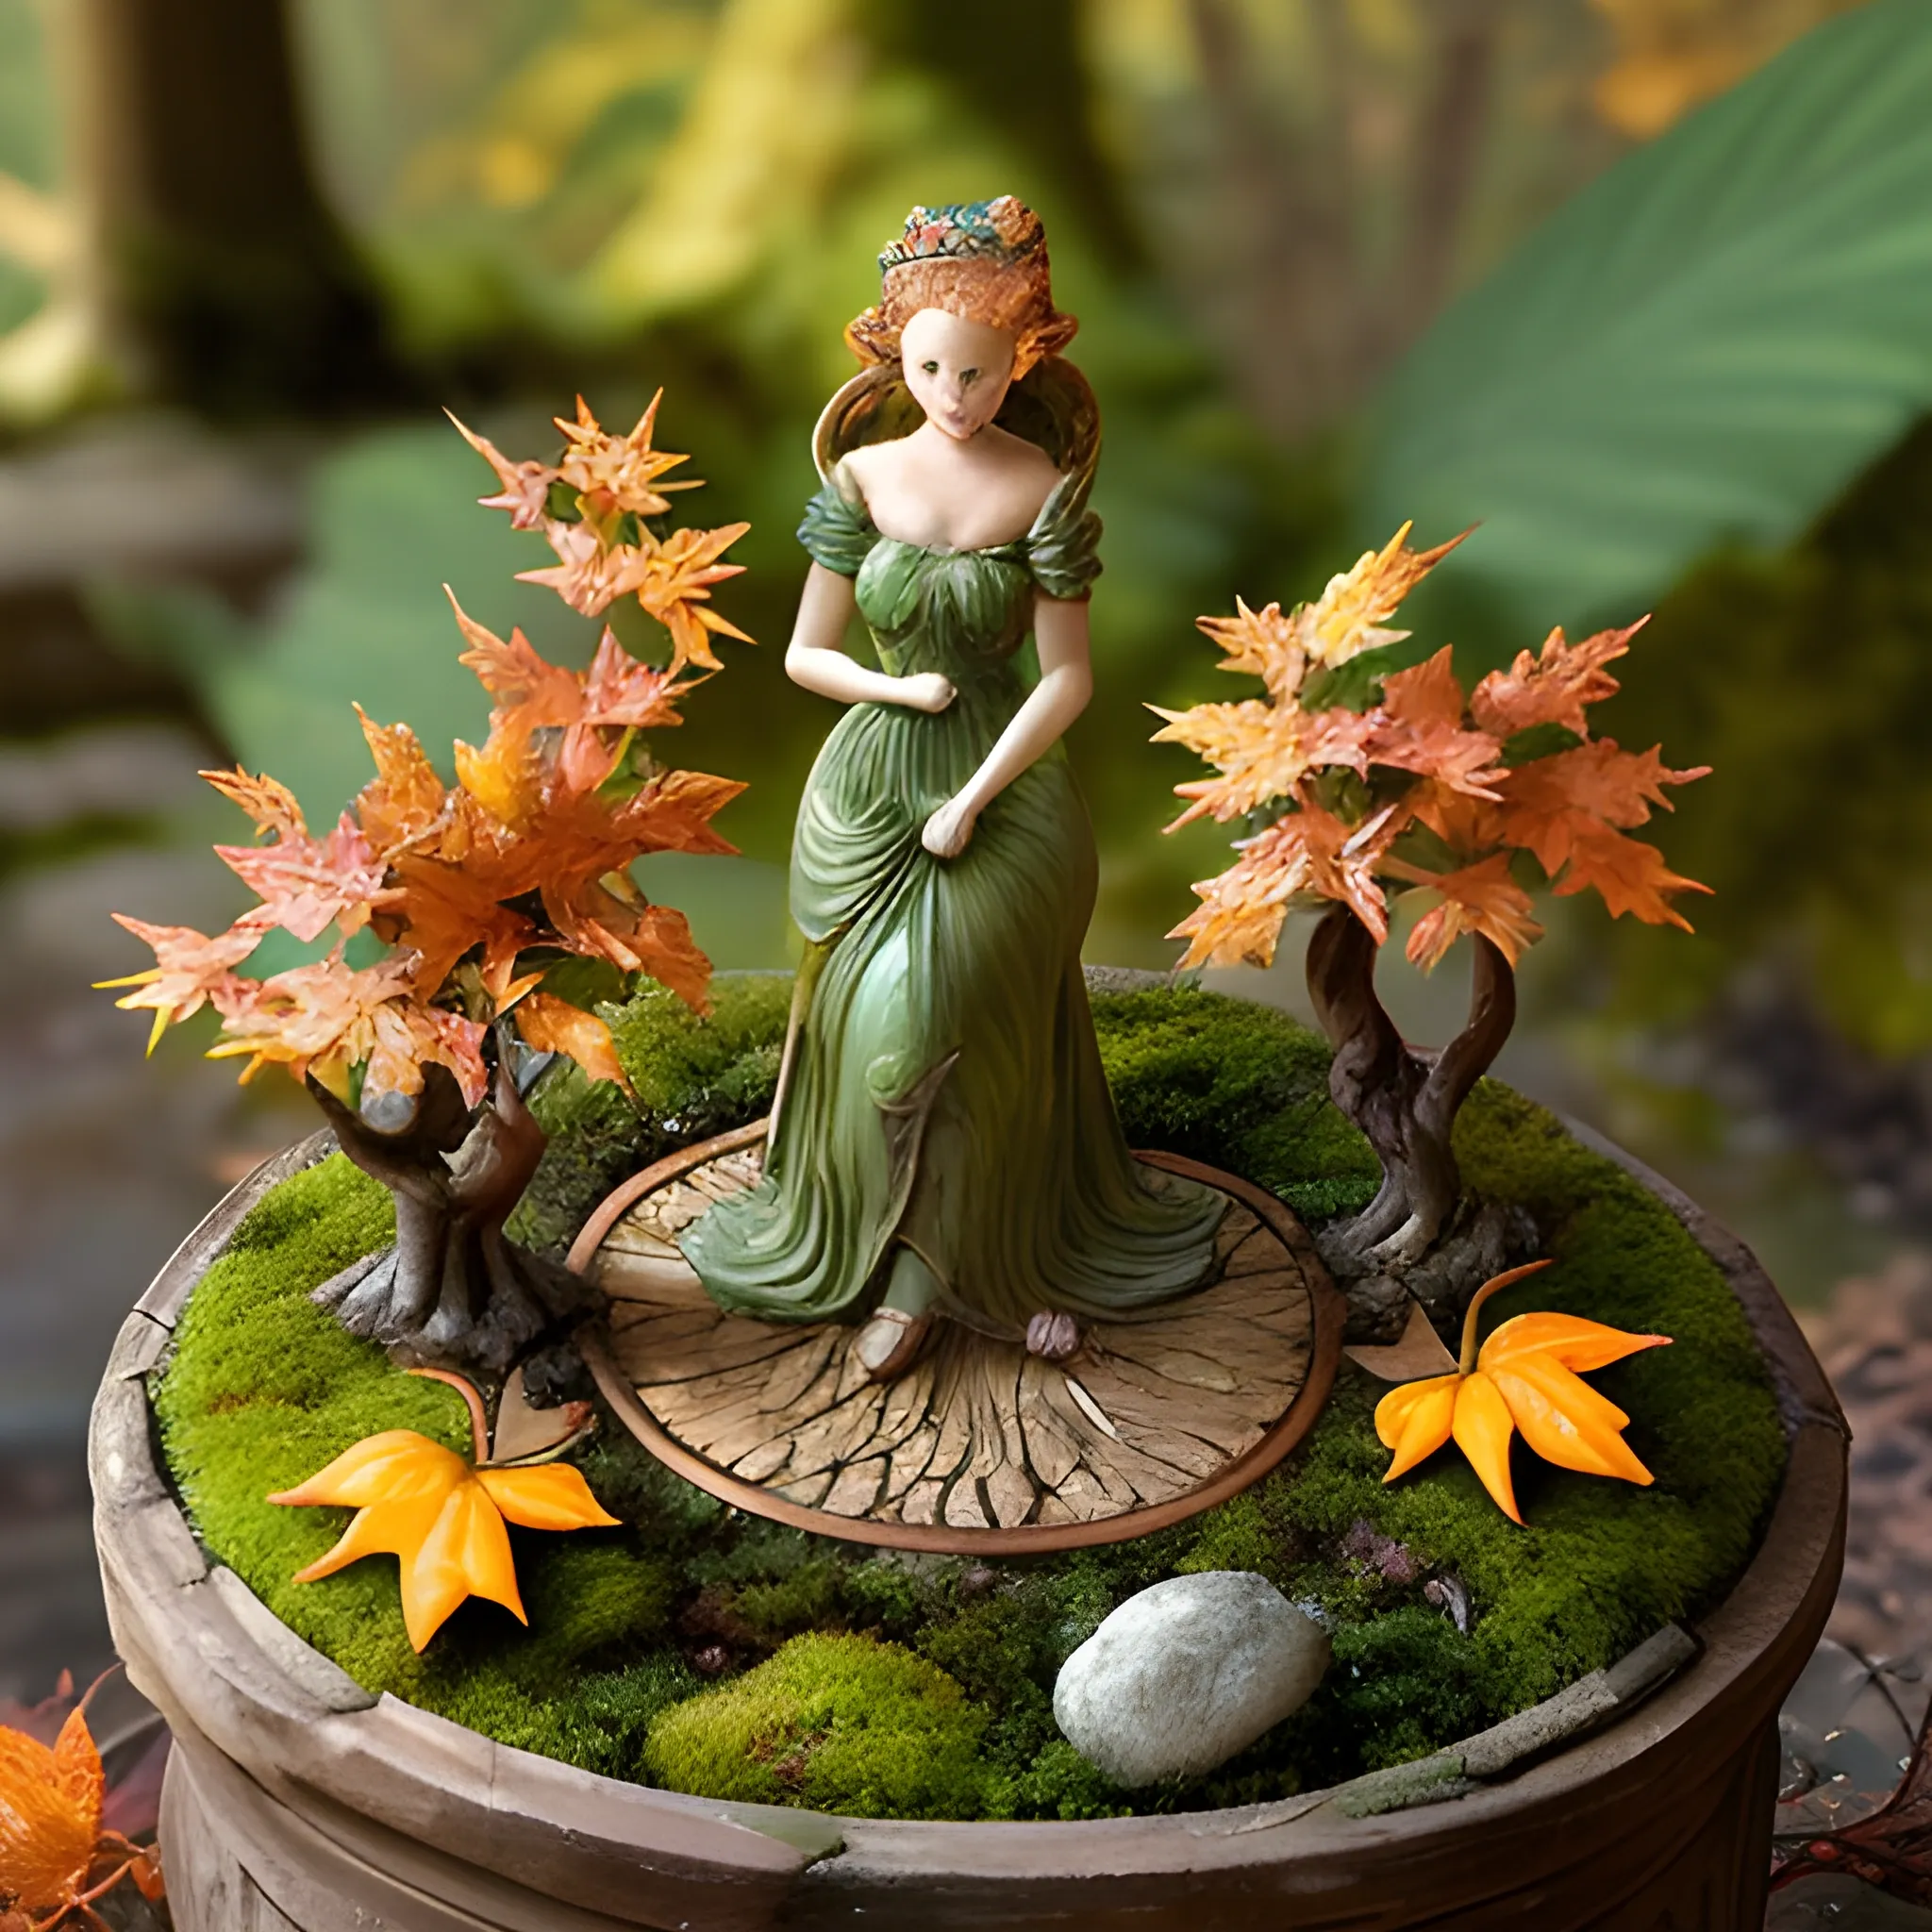 A whimsical miniature figure crafted from delicately arranged autumn leaves dances gracefully on the rim of a weathered, moss-covered terracotta pot. It is set against a lush, vibrant forest backdrop, where dappled sunlight filters through the canopy above, casting intricate shadows. The scene has an ethereal aesthetic with warm, earthy tones of sienna, umber, and olive green, accented by hints of emerald and golden light, evoking a sense of wonder and enchantment, as if plucked from a fantastical realm.